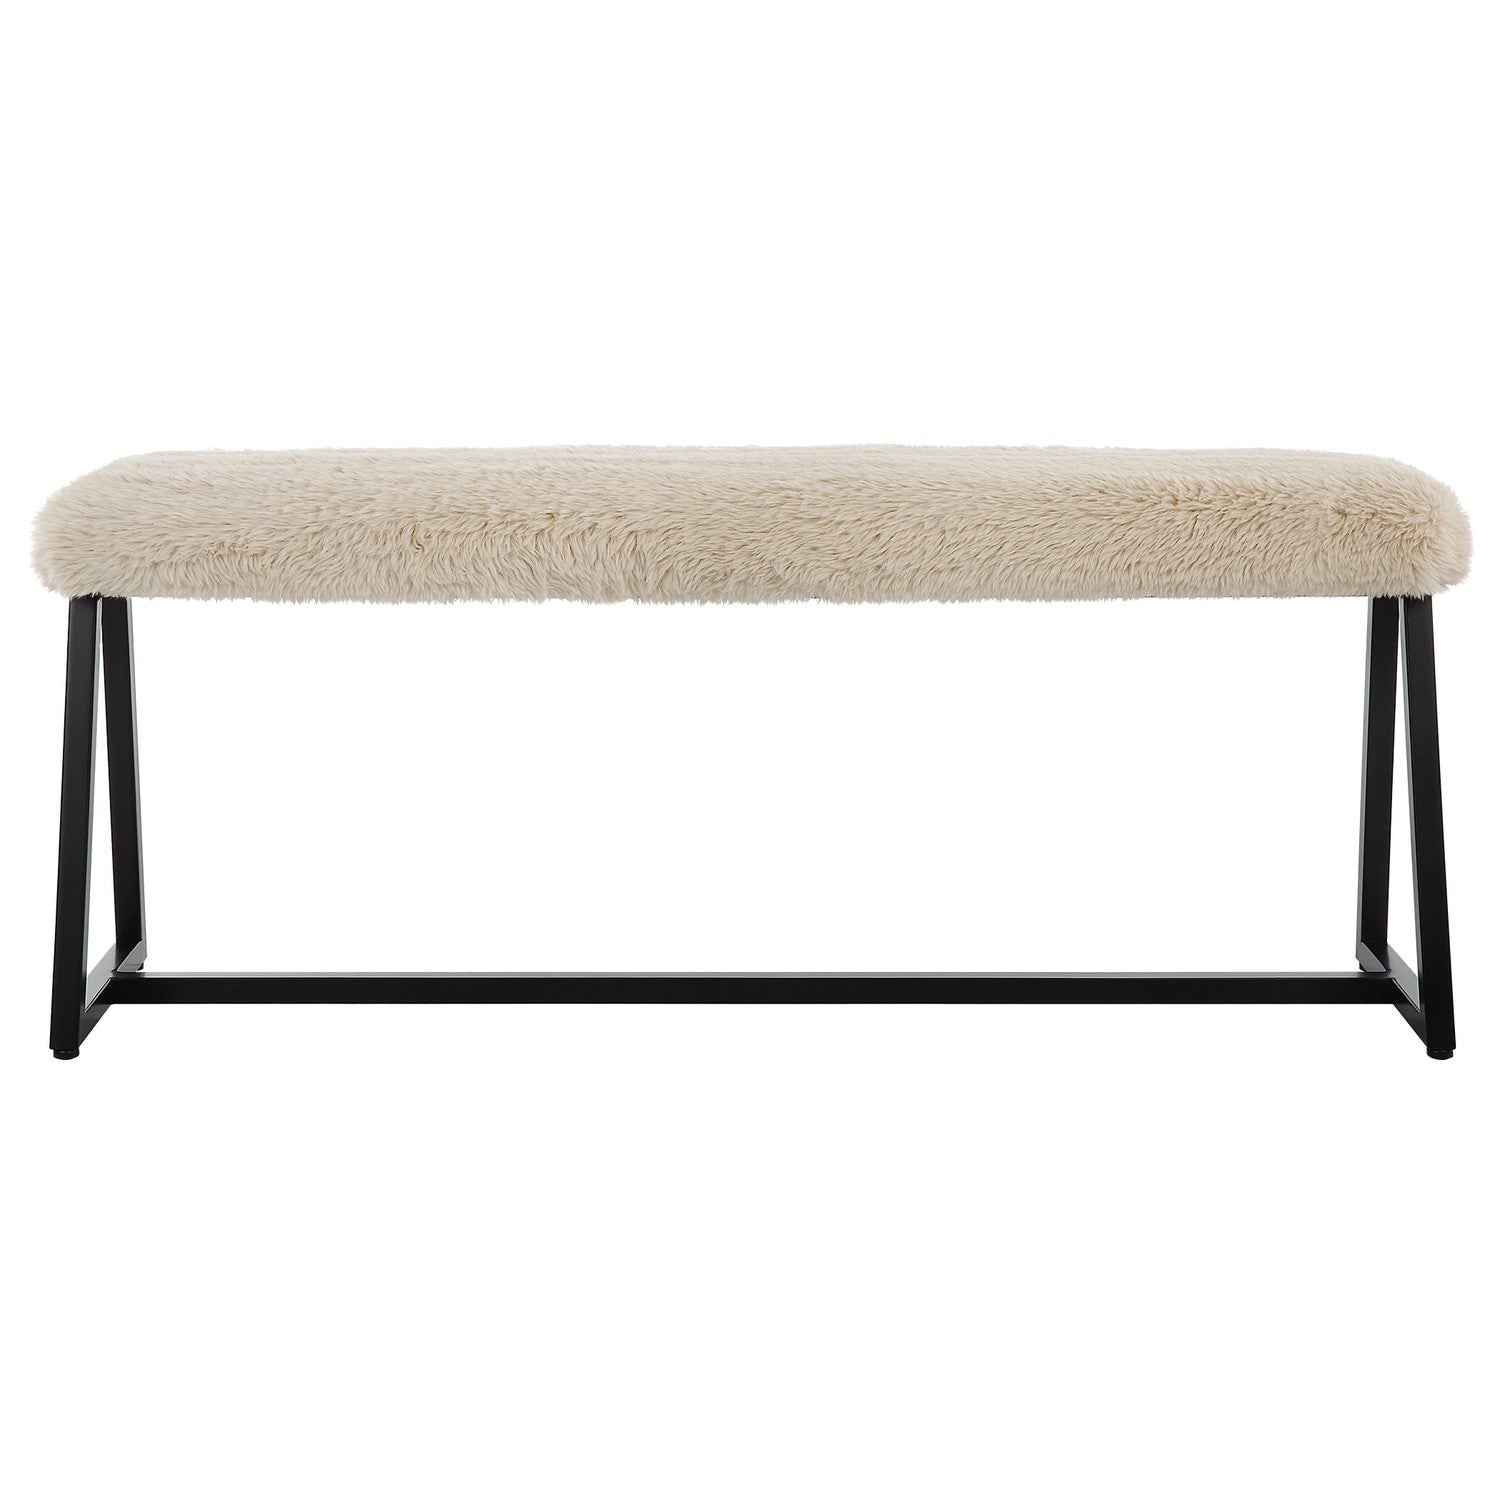 Taupo Sheepskin Bench-Uttermost-UTTM-23056-Benches-1-France and Son